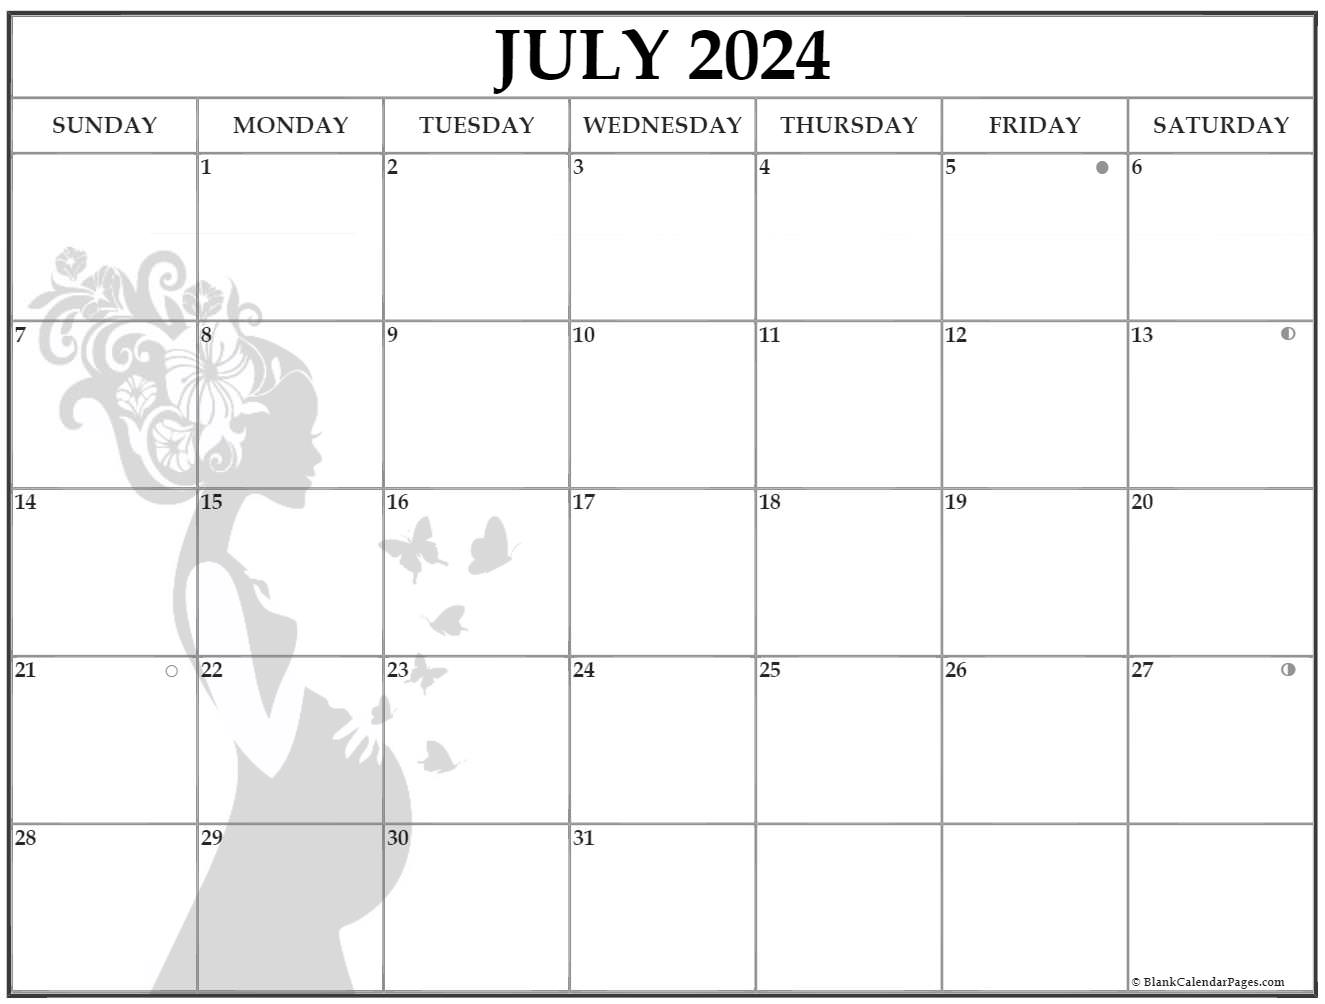 Collection of July 2023 photo calendars with image filters.